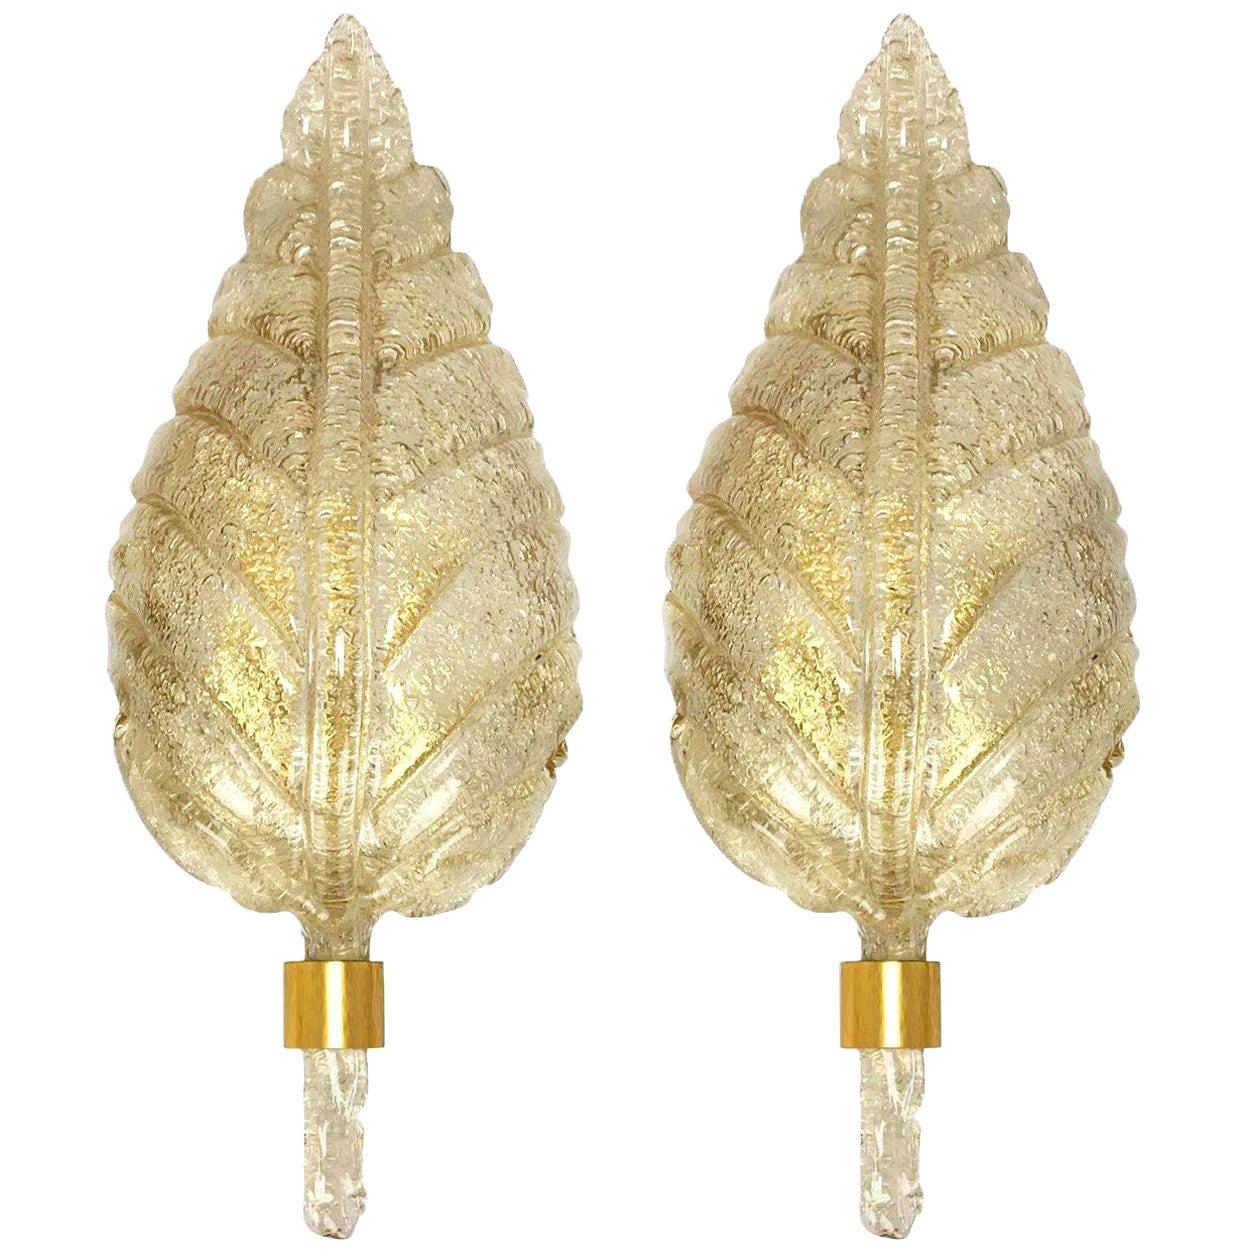 One of the four elegant and exquisite hand blown Murano glass Barovier & Toso wall sconces with special gold inclusions. Each light fixture consists one blown Murano glass leave. Mounted on a brass frame. The leaves refract light beautifully. The